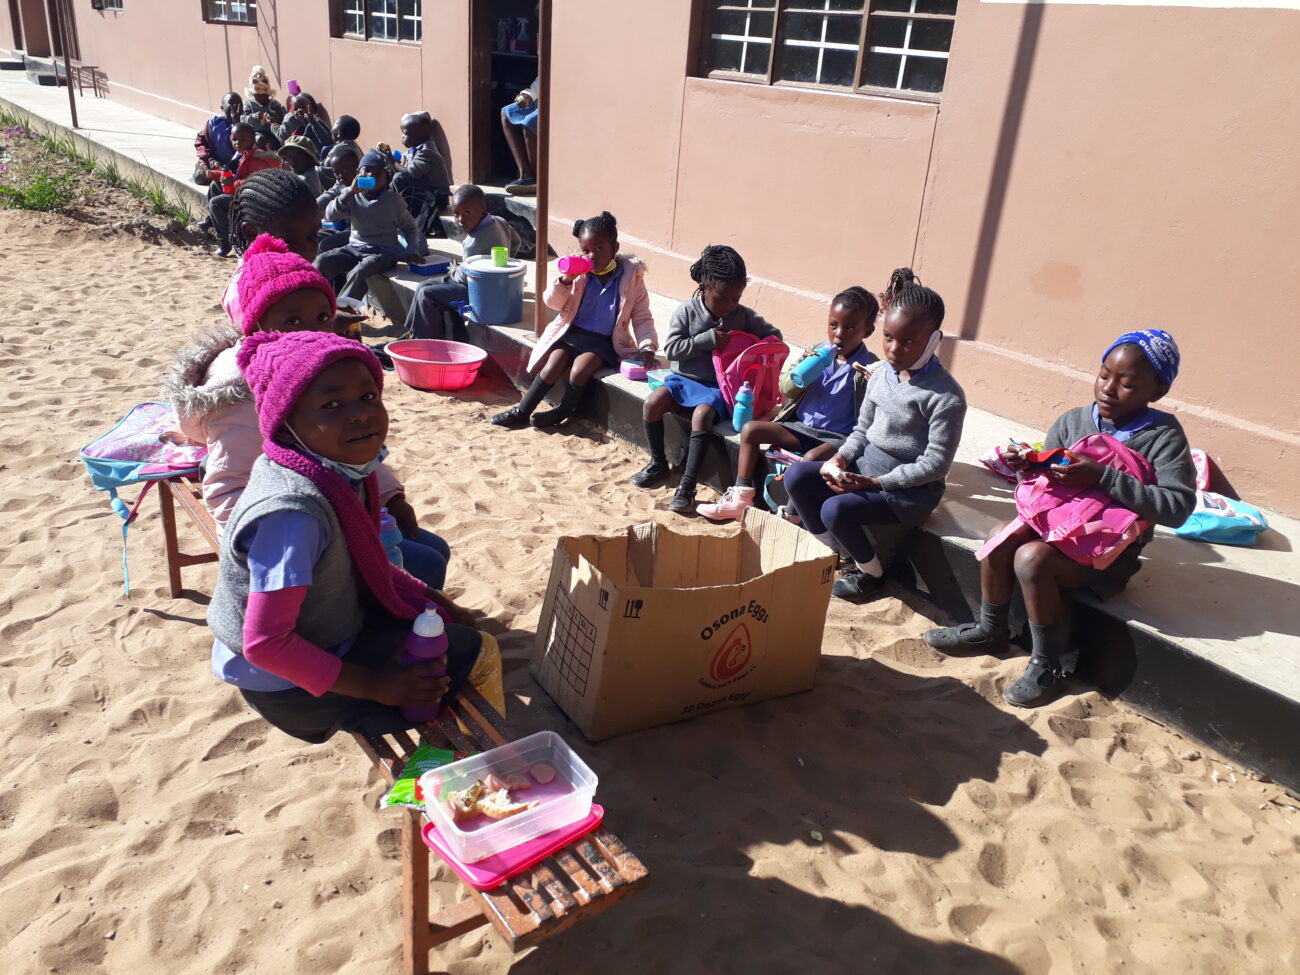 NAMIBIA: Donor funding from Salesian Missions provides nutritional support for 123 children